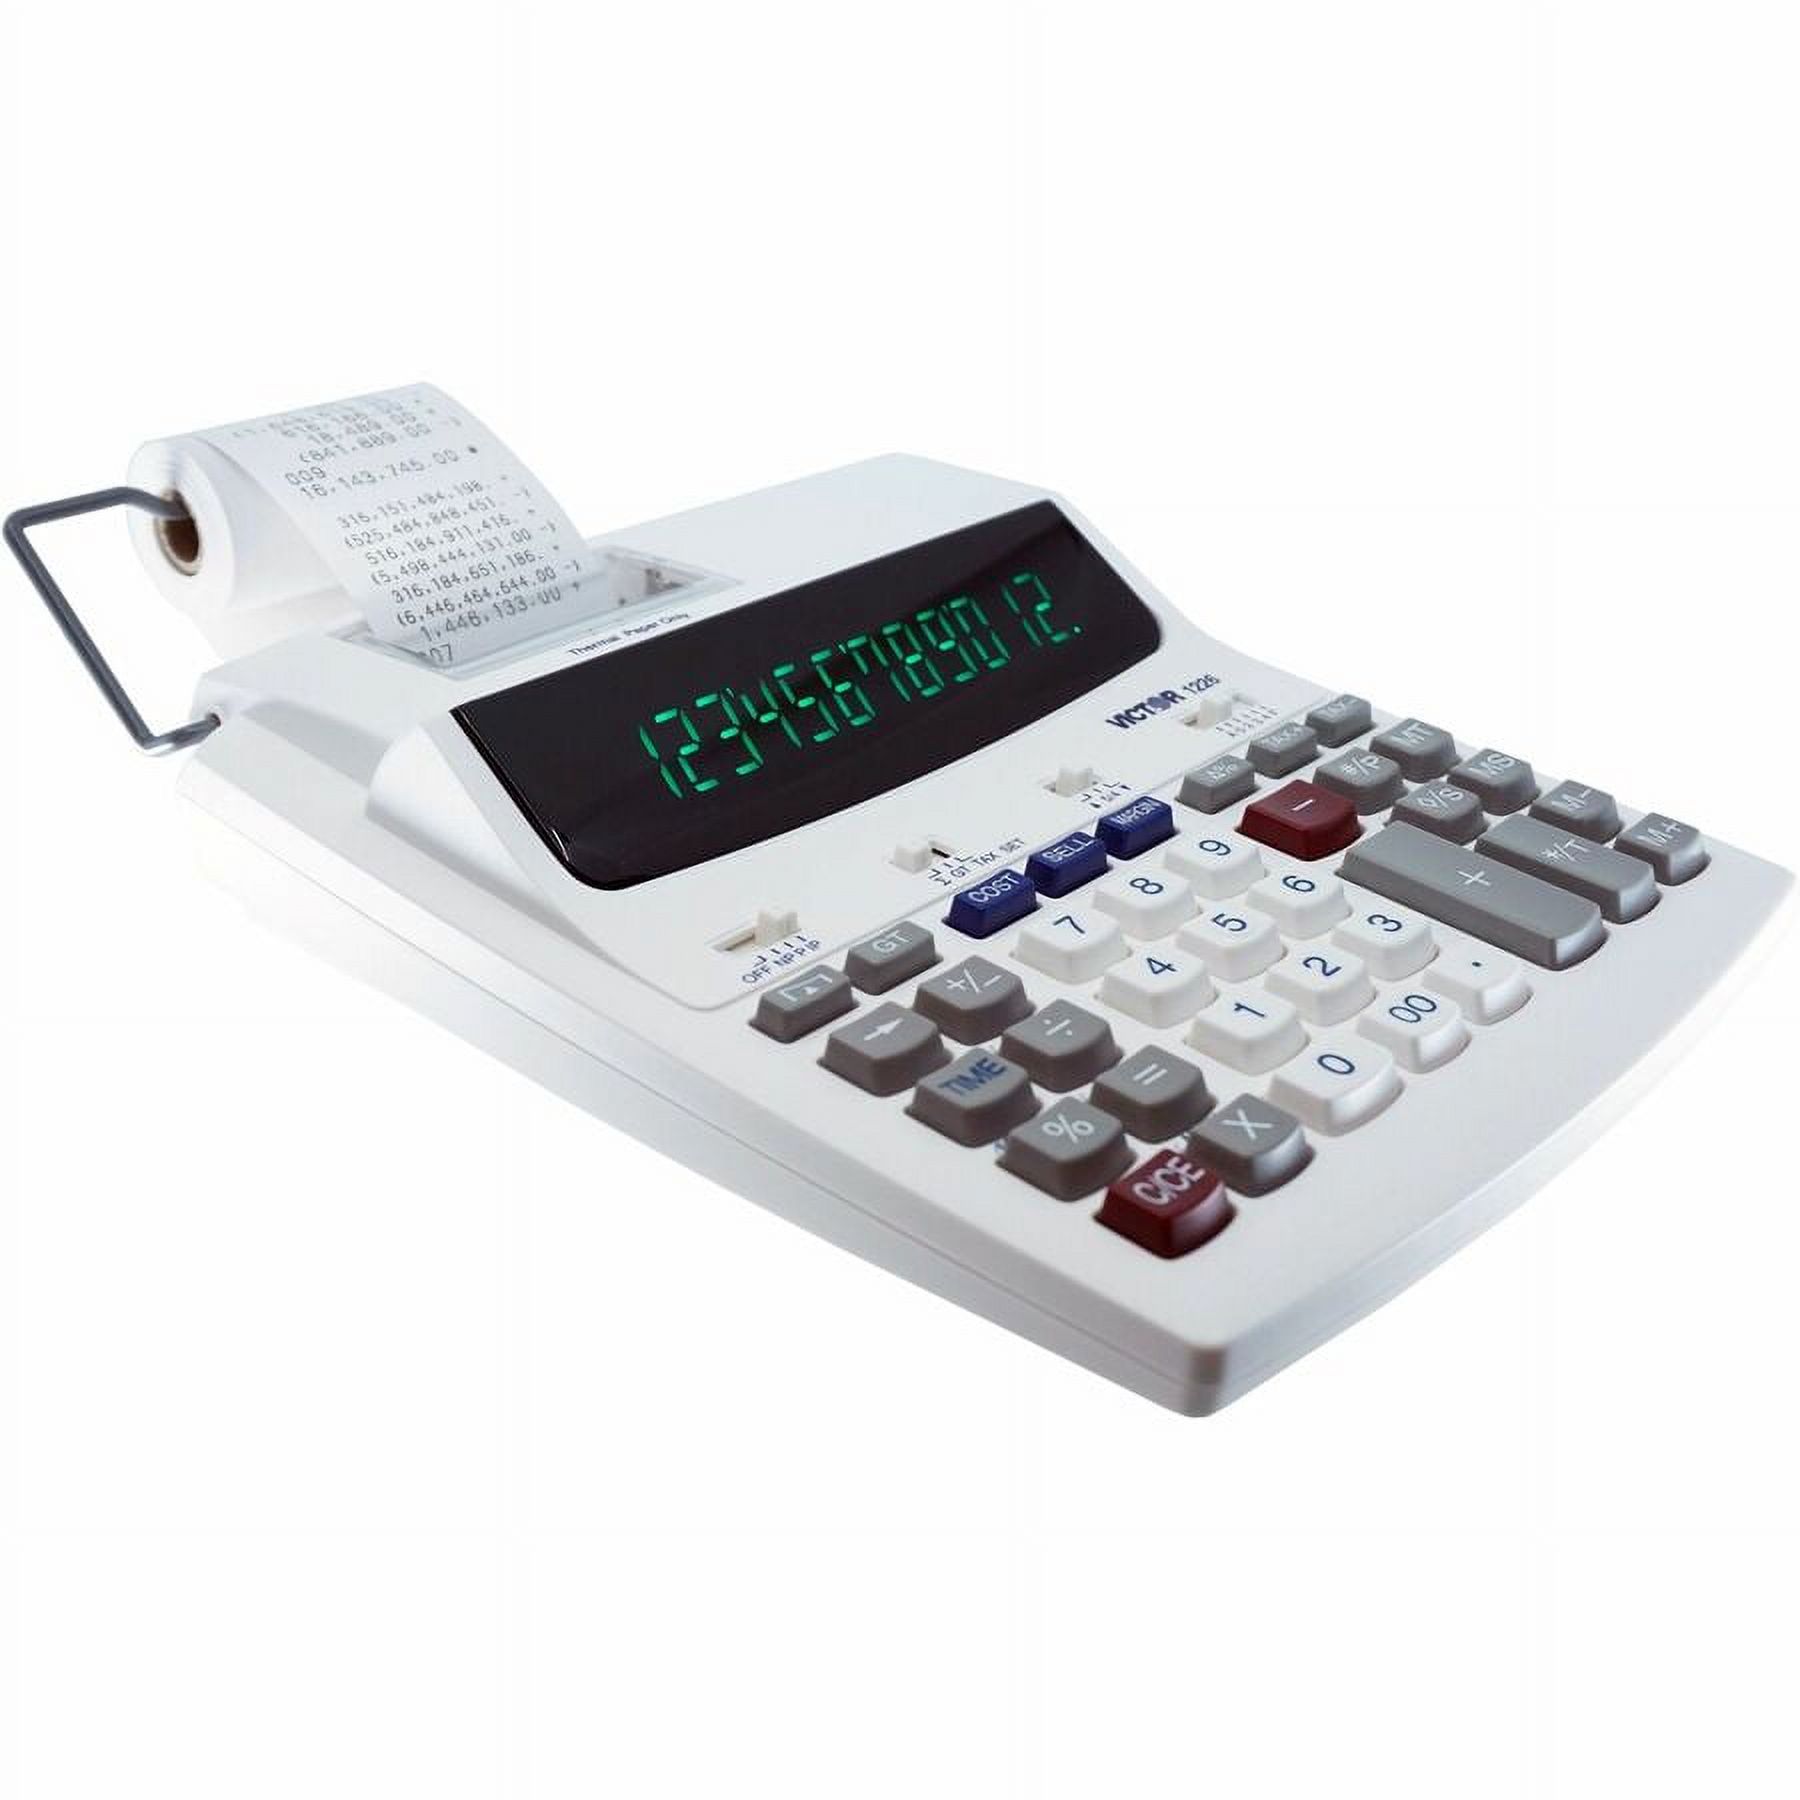 Victor Technology 1226 Thermal Printing Calculator, 12-Digit Display, 8.0 LPS Printing Speed, Off-White - image 3 of 6